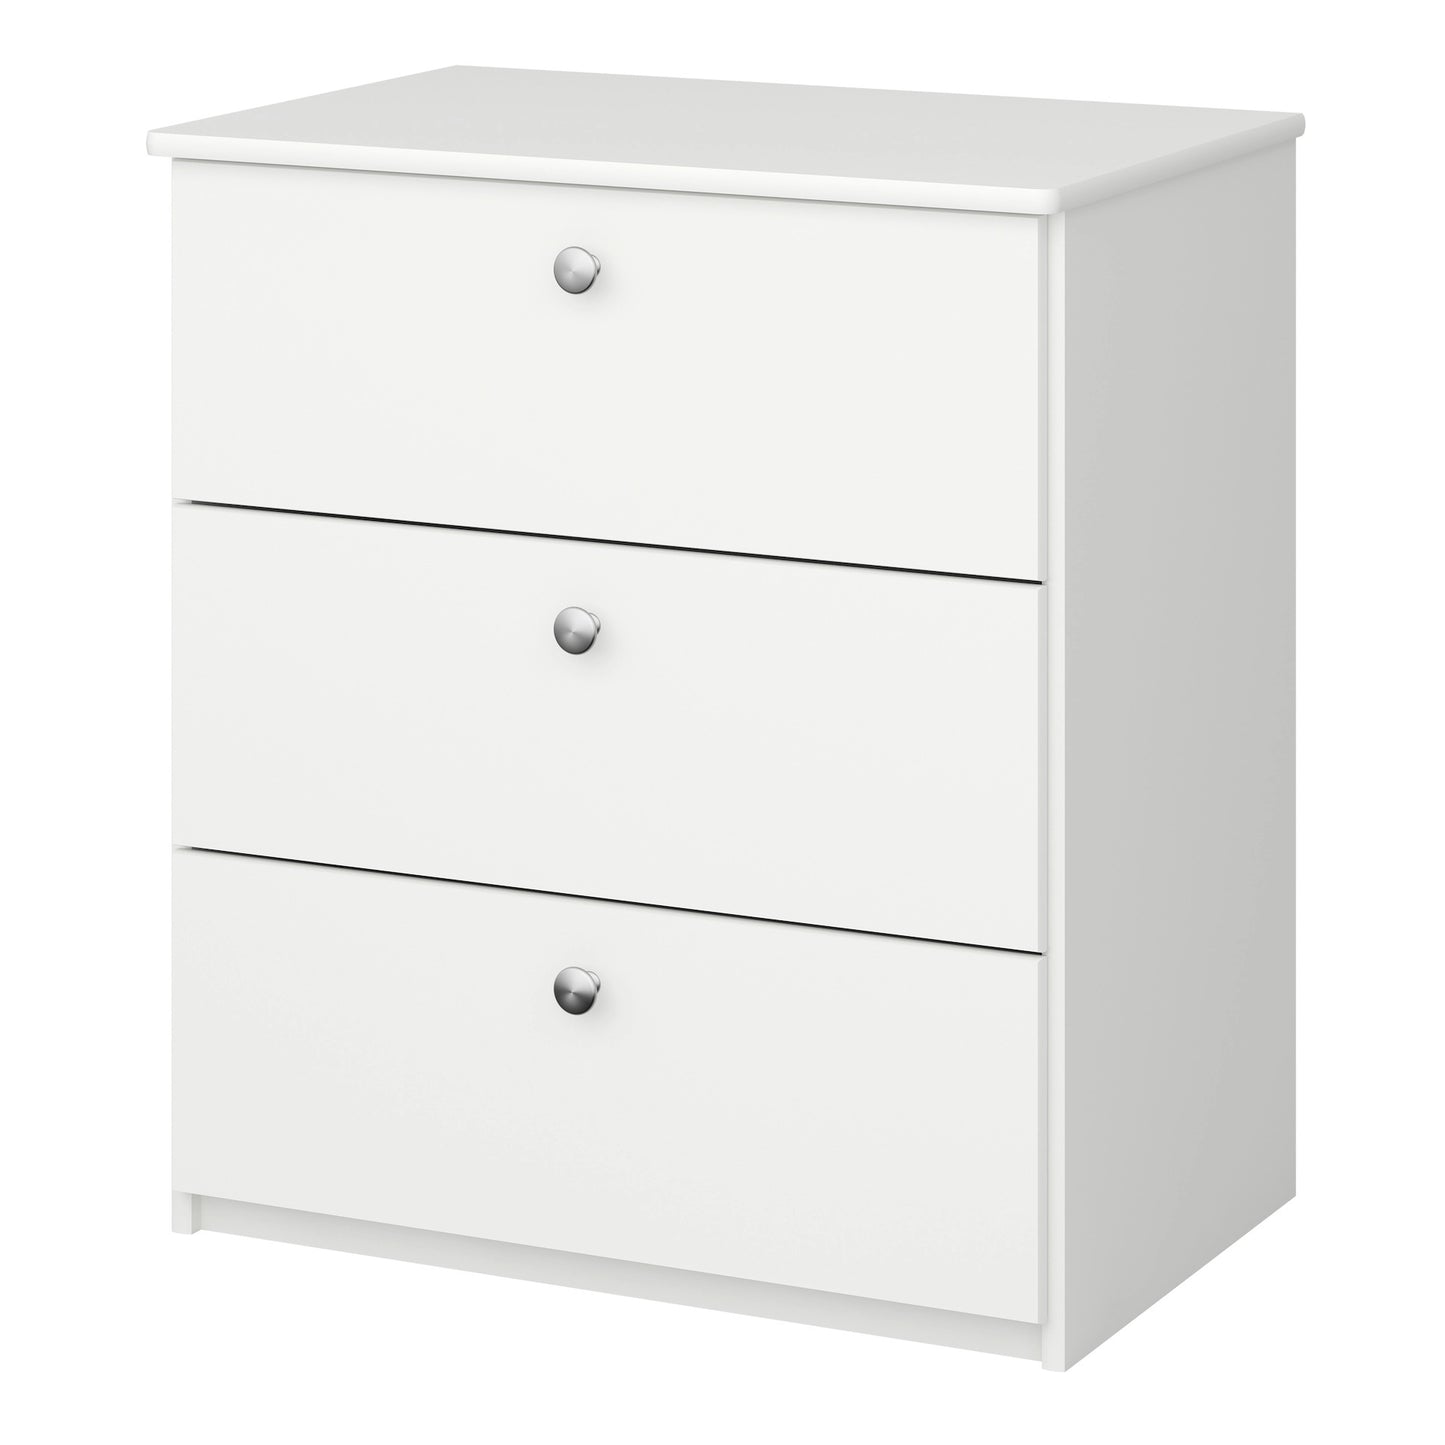 Furniture To Go Steens For Kids 3 Drawer Chest White